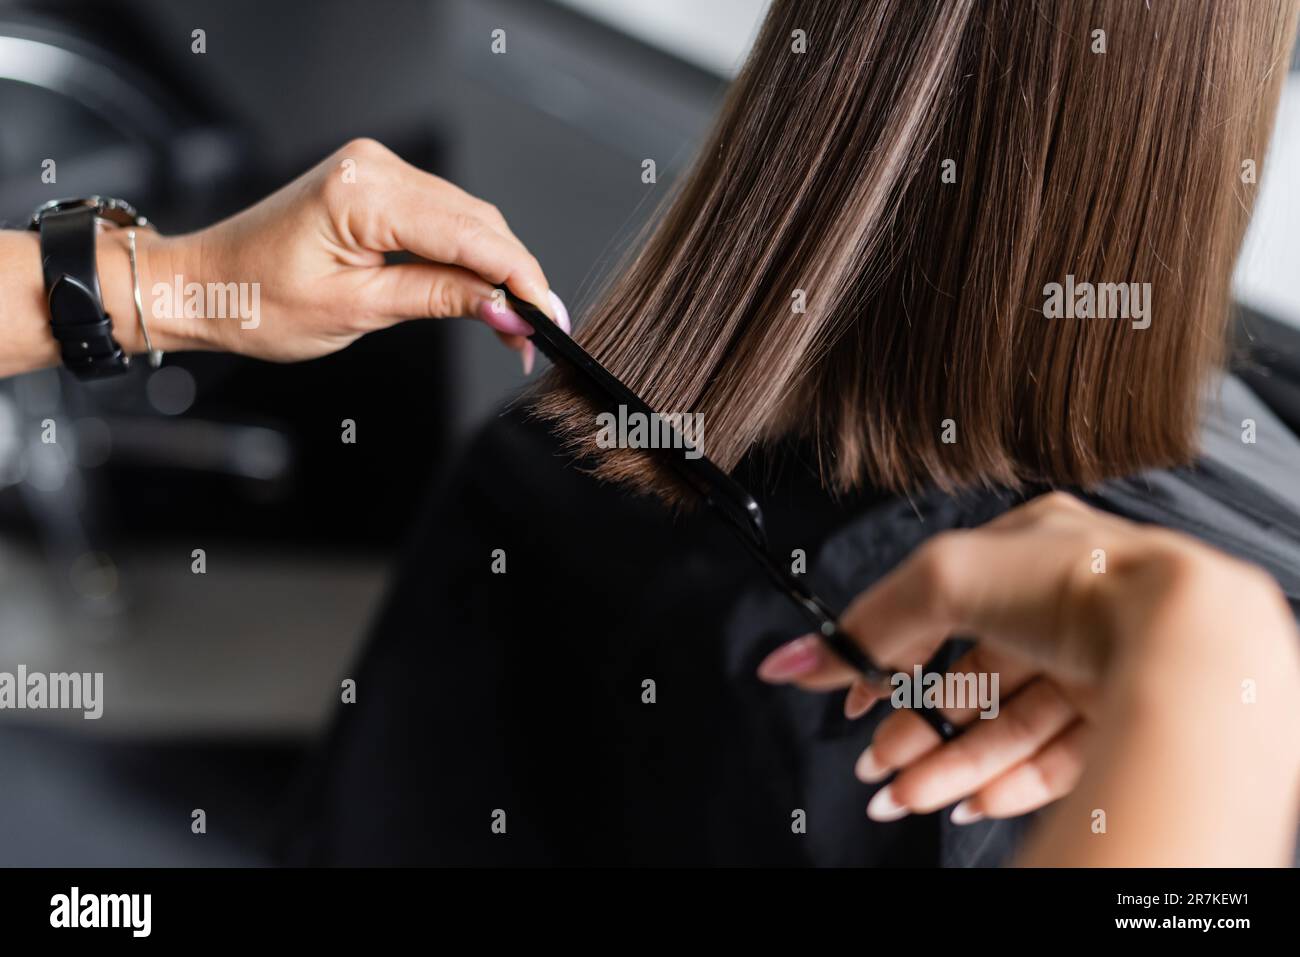 close up of hairdresser cutting short brunette hair of female client, beauty worker, haircut, salon job, beauty industry, scissors and professional co Stock Photo